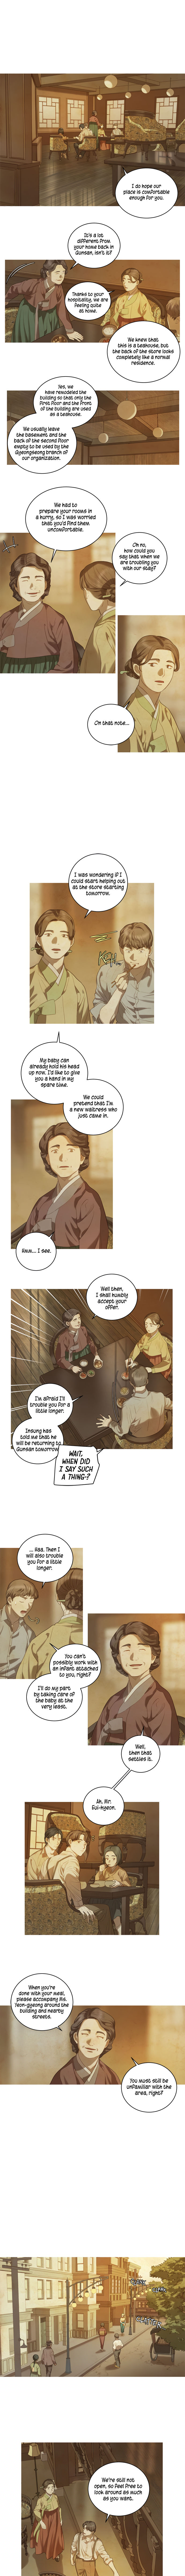 Gorae Byul - The Gyeongseong Mermaid - Chapter 14 Page 6